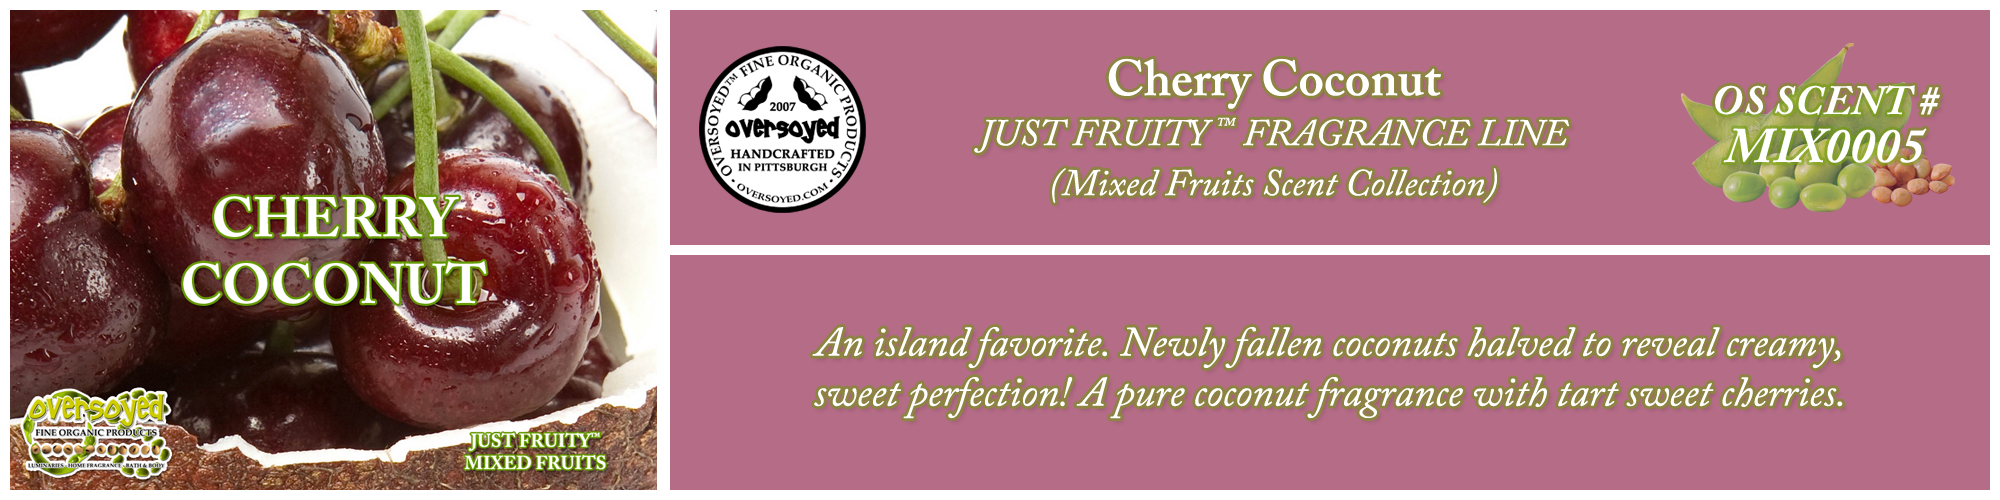 Cherry Coconut Handcrafted Products Collection